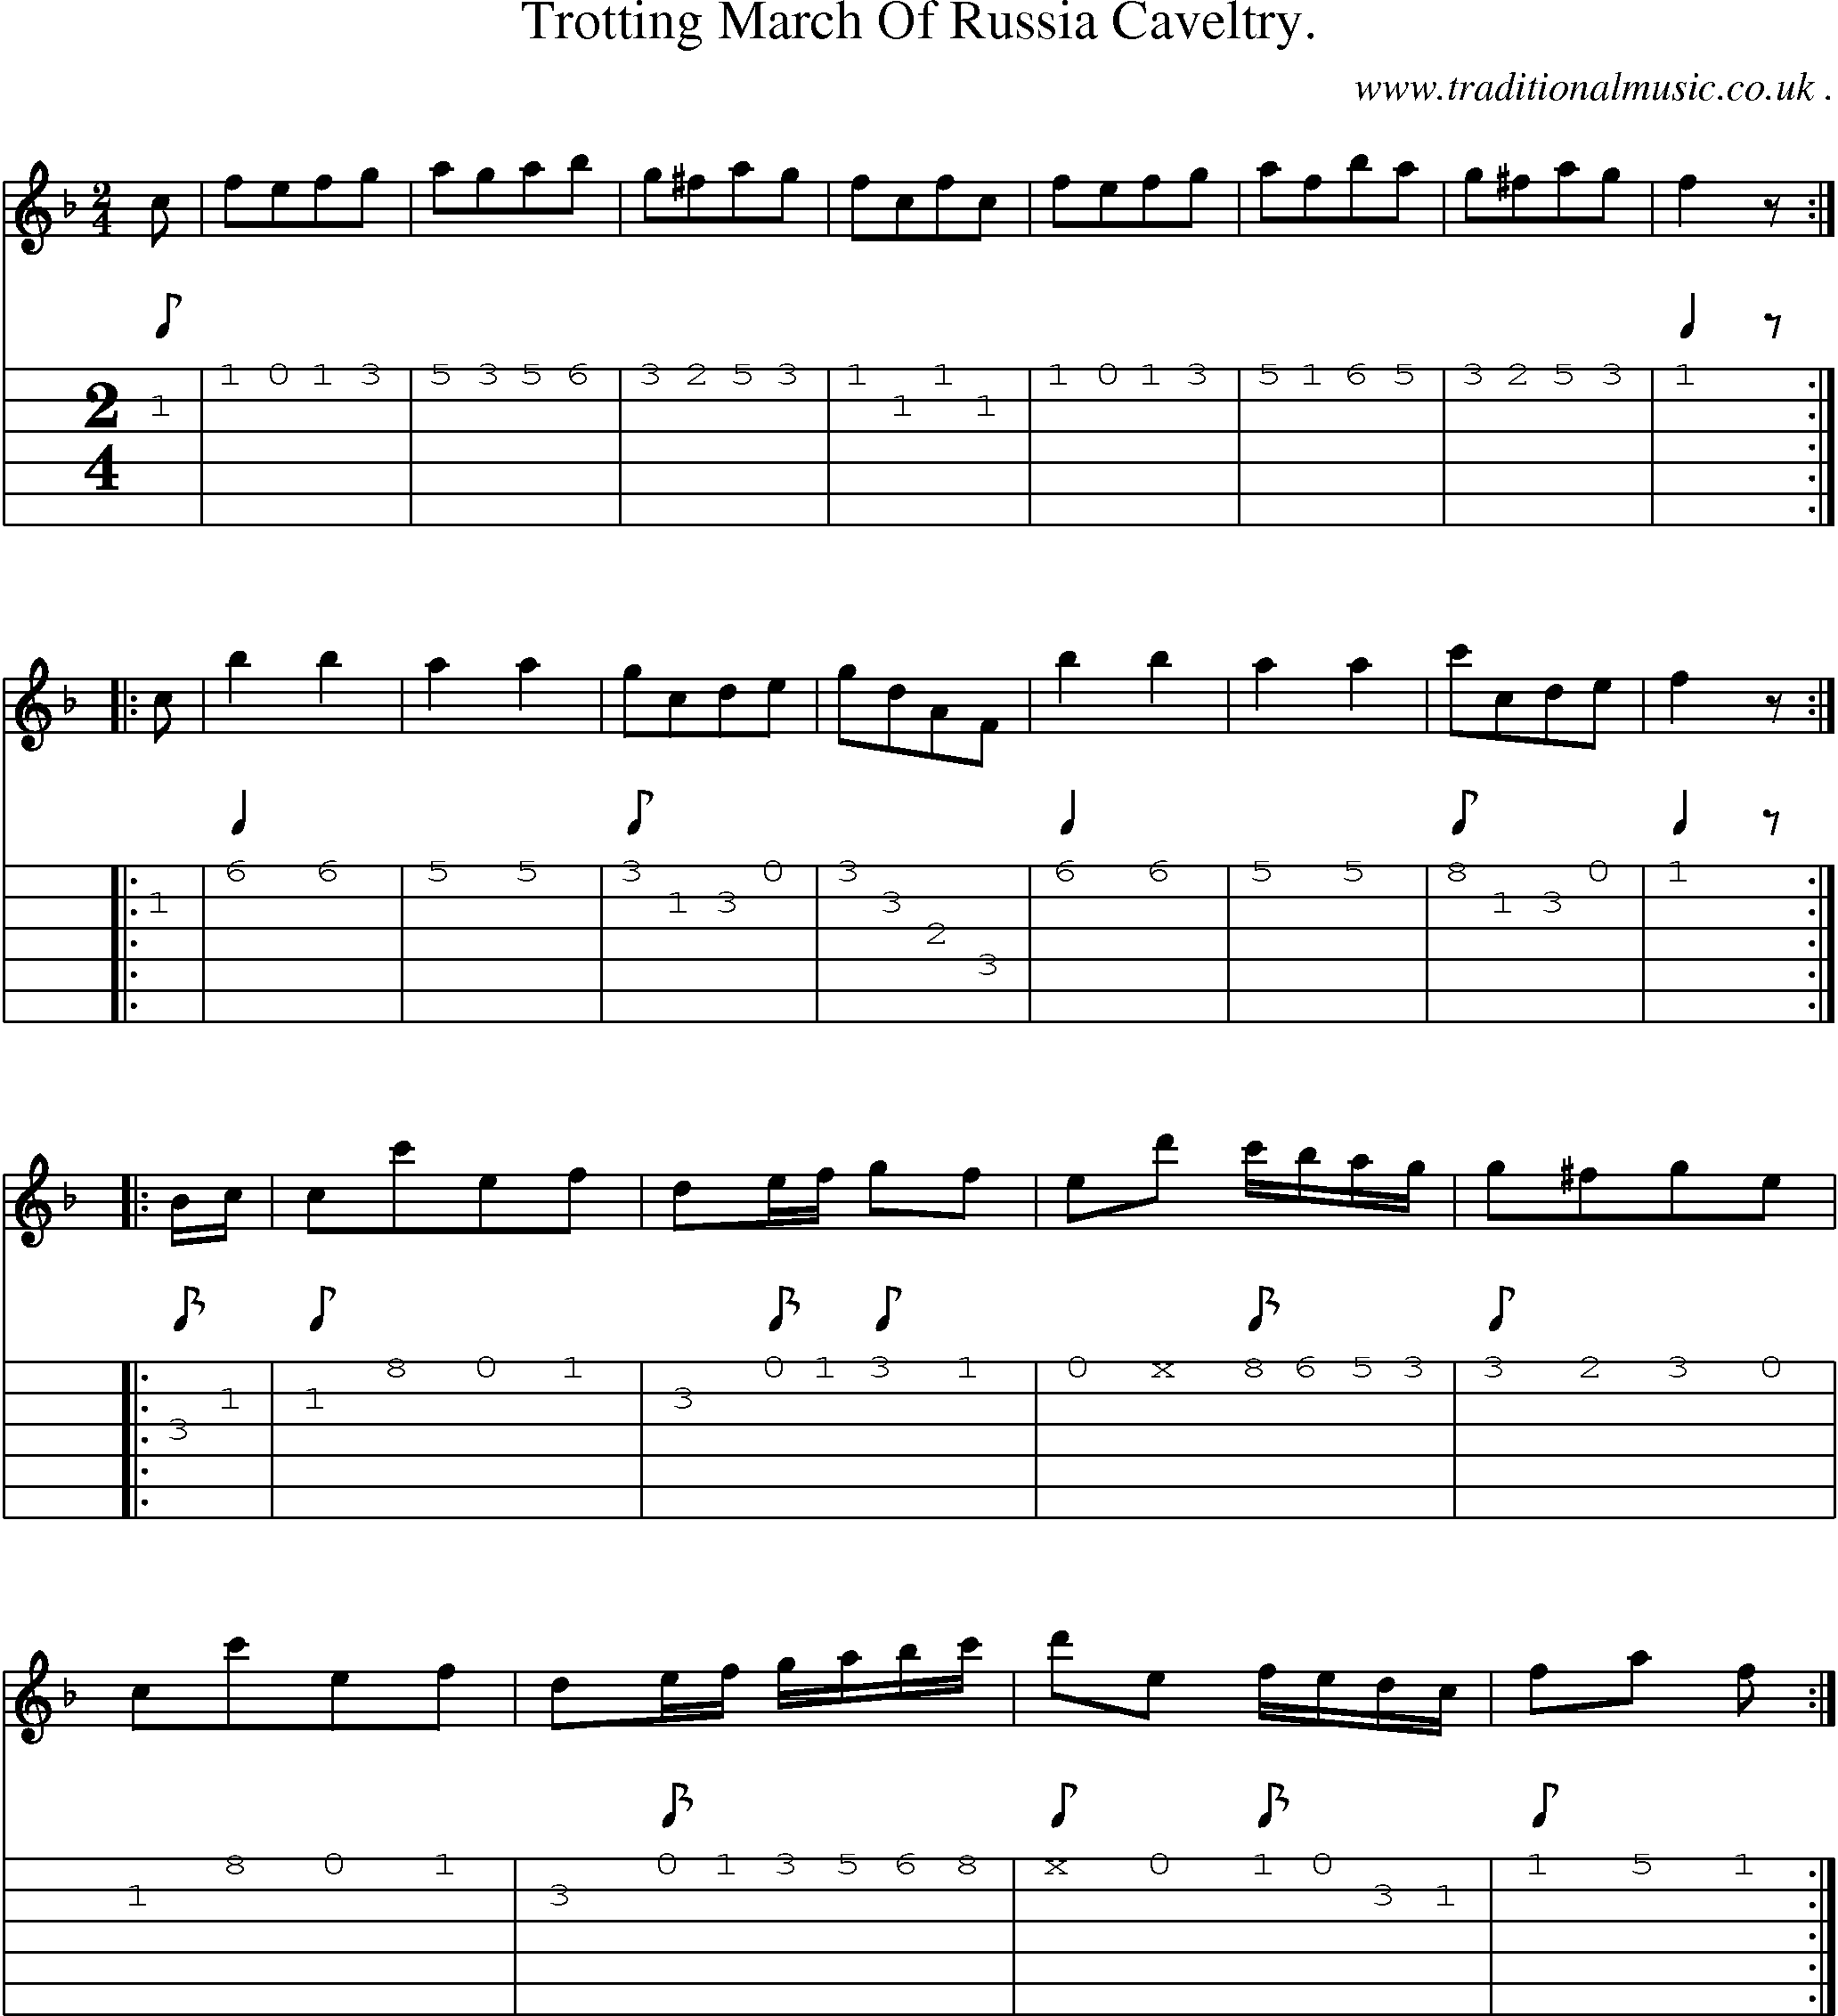 Sheet-Music and Guitar Tabs for Trotting March Of Russia Caveltry